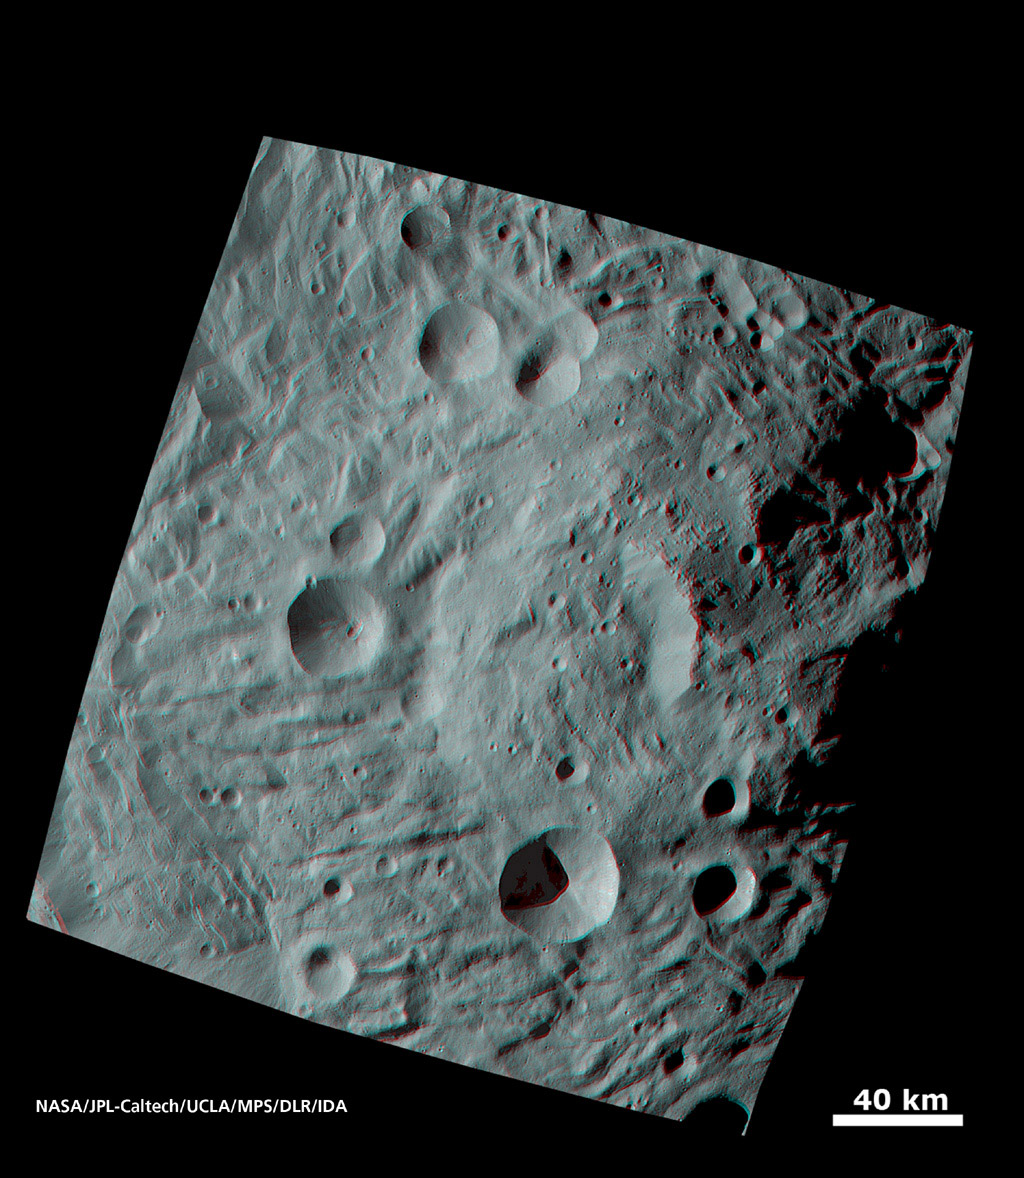 Vesta's Surface in 3-D: A Big Mountain at the Asteroid's South Pole